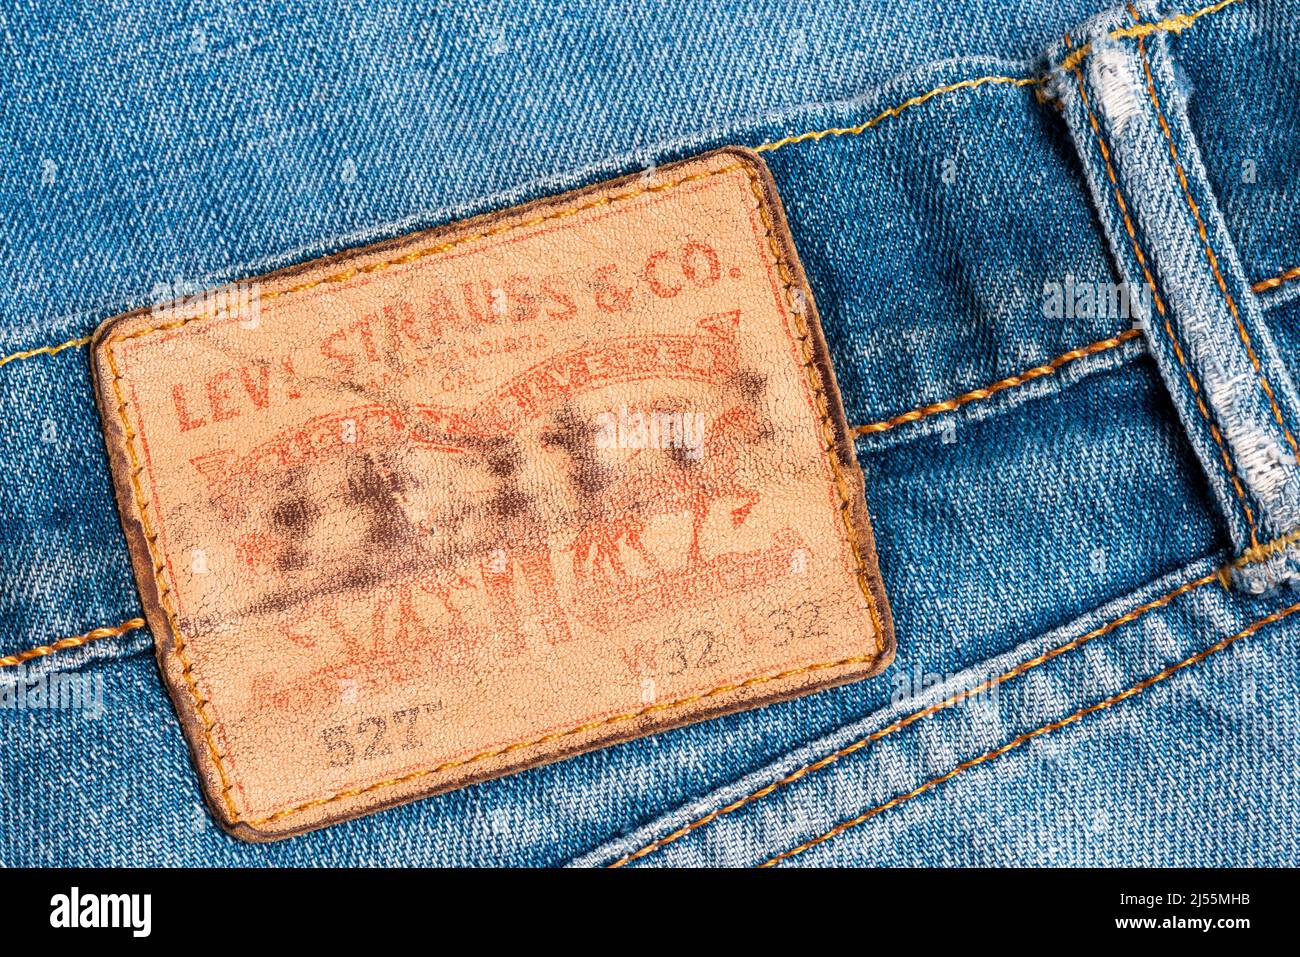 Levi's weathered back emblem on classic 527 boot cut blue jeans Stock Photo